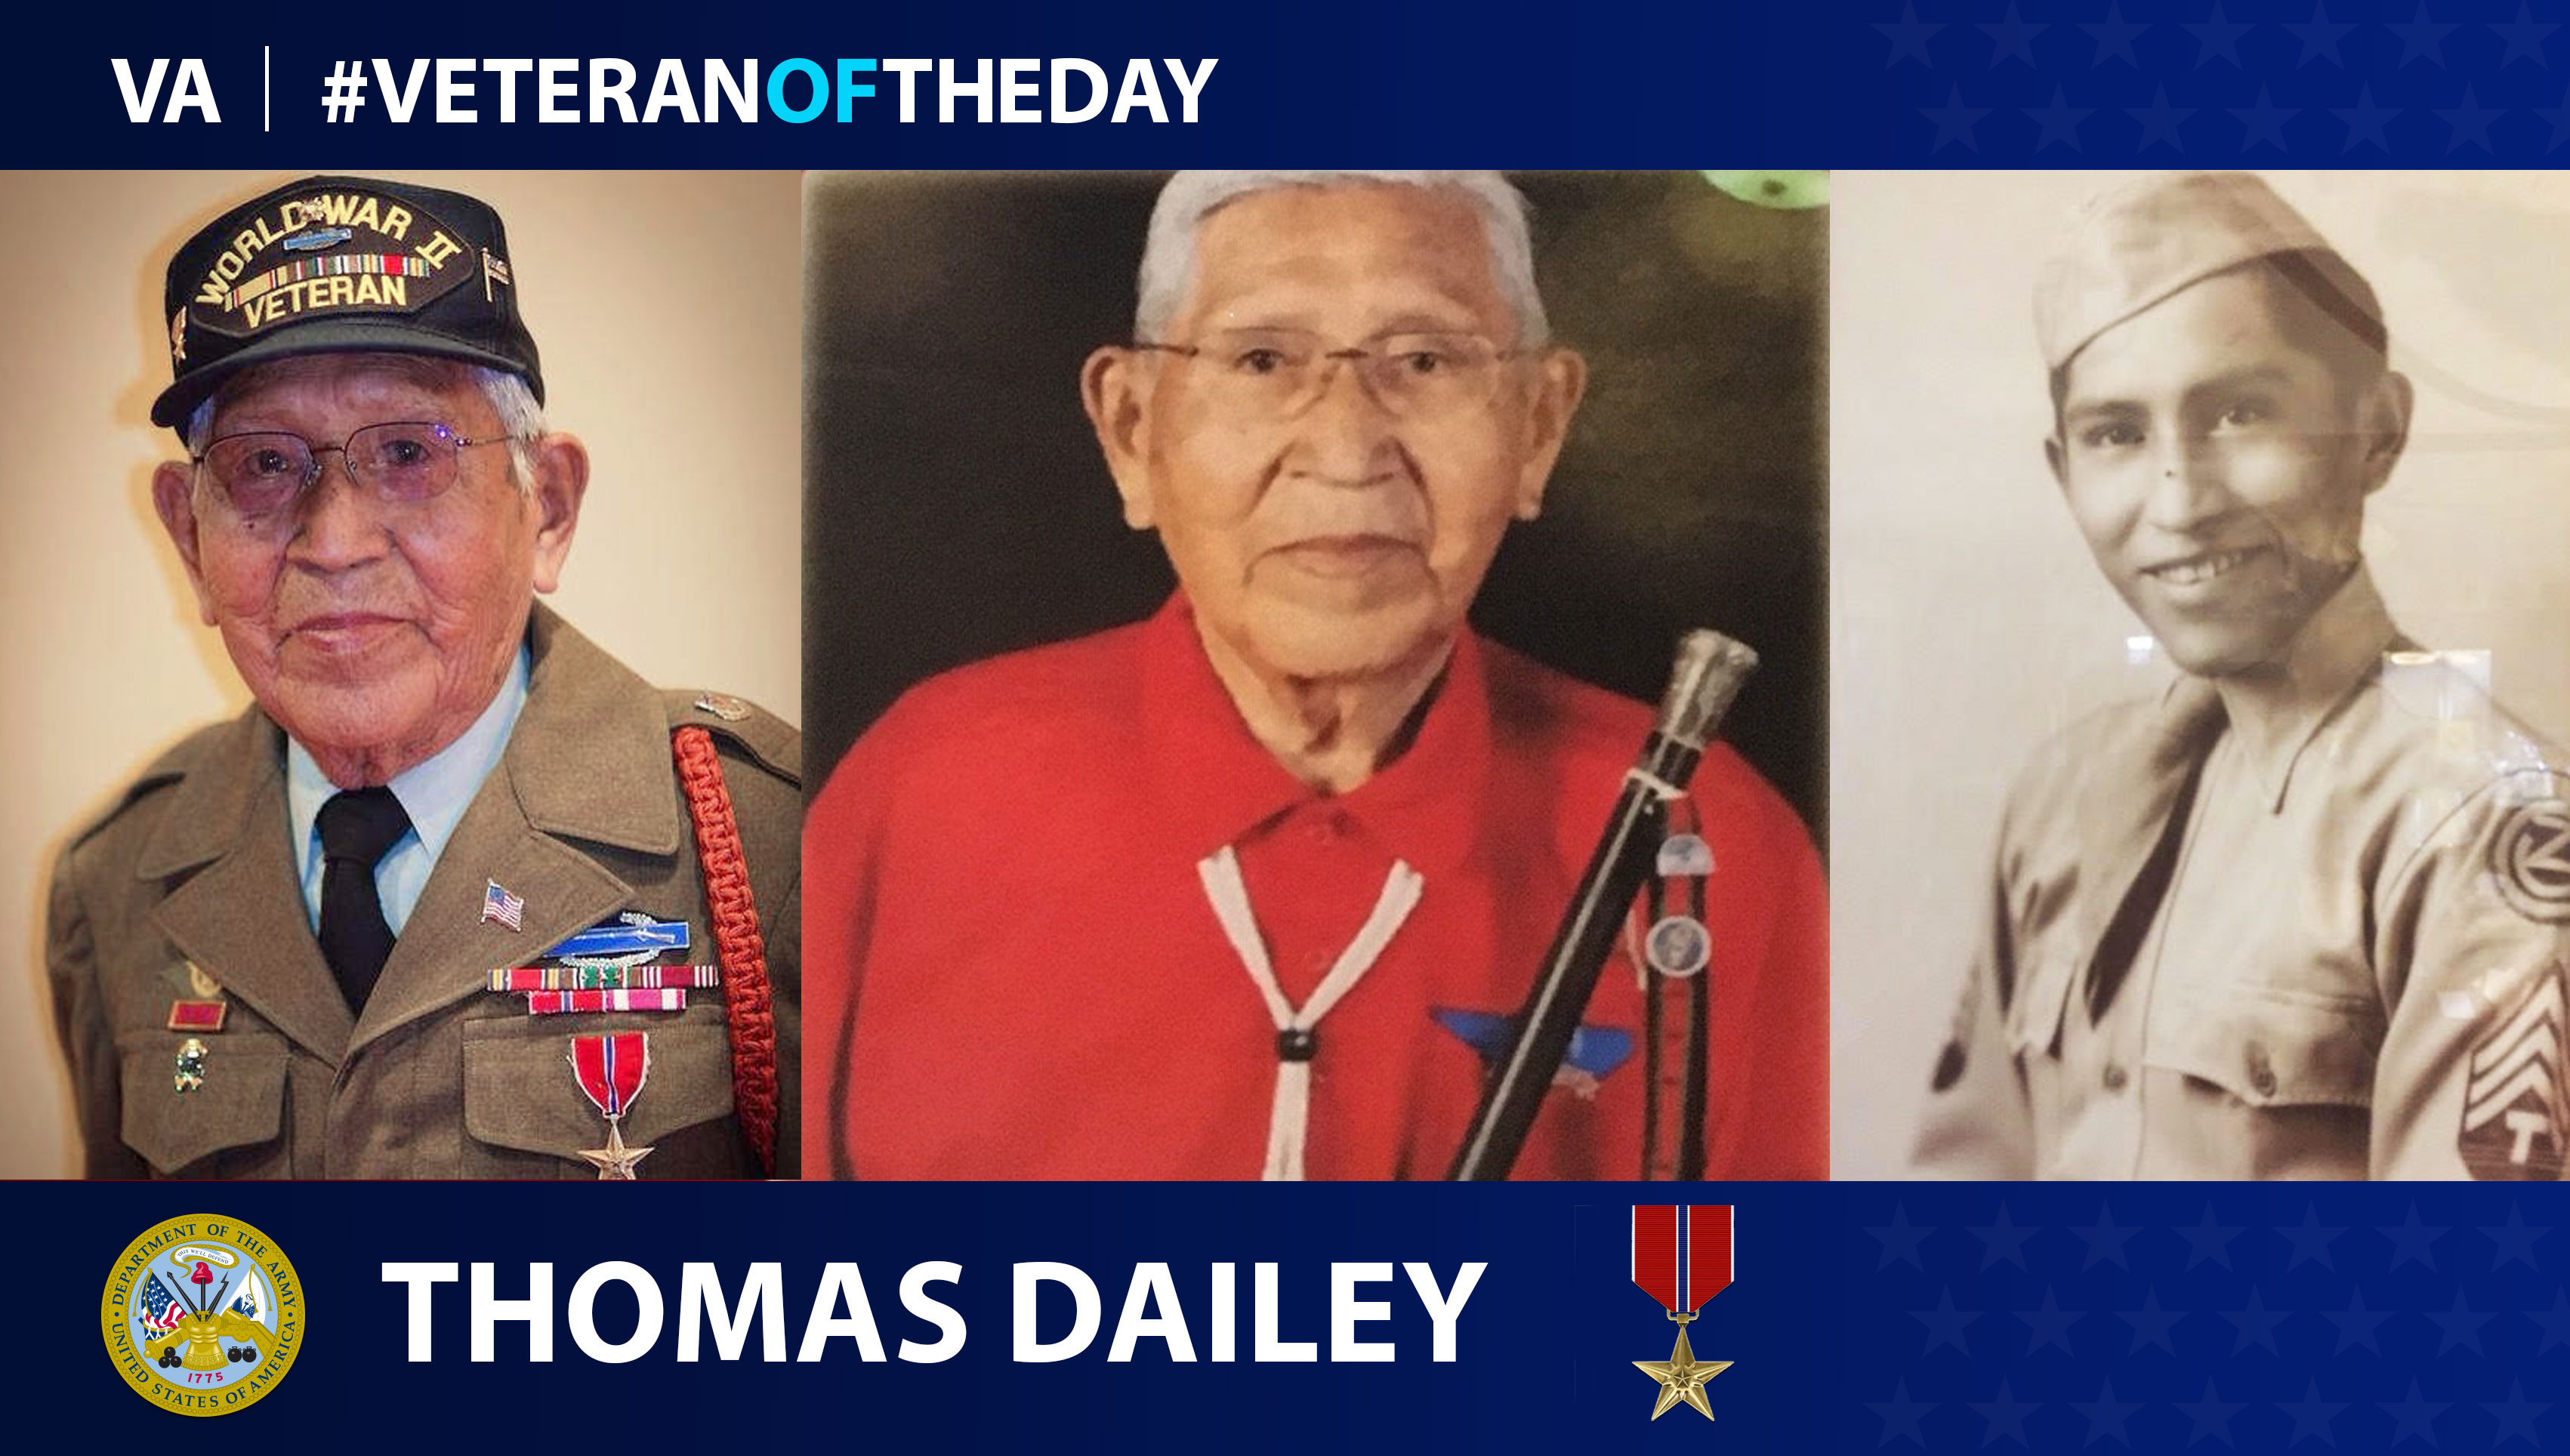 Veteran of the Day graphic for Thomas Dailey.